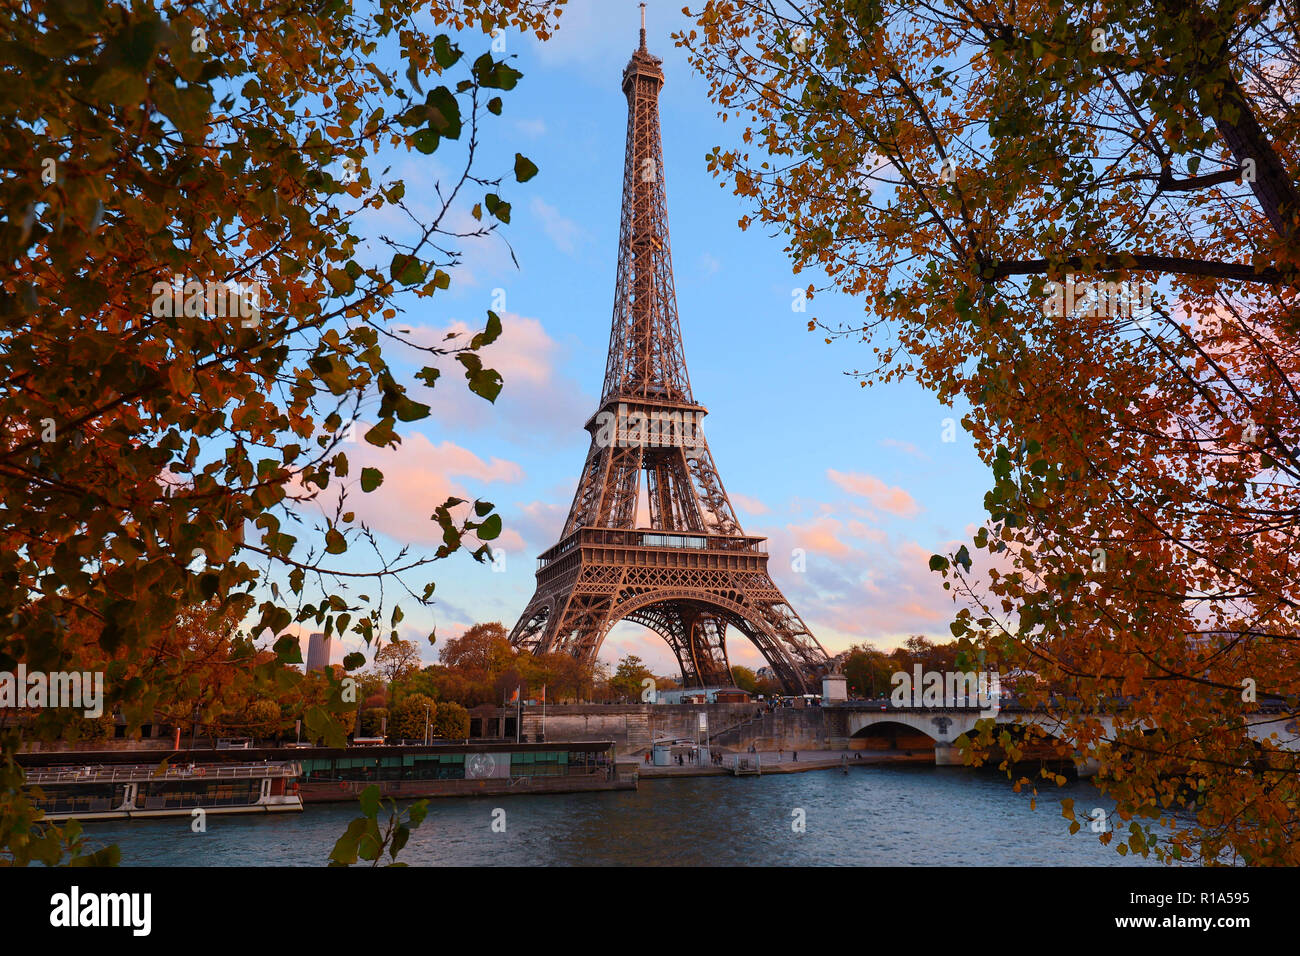 The Eiffel tower and autumnal trees in the foreground. Stock Photo